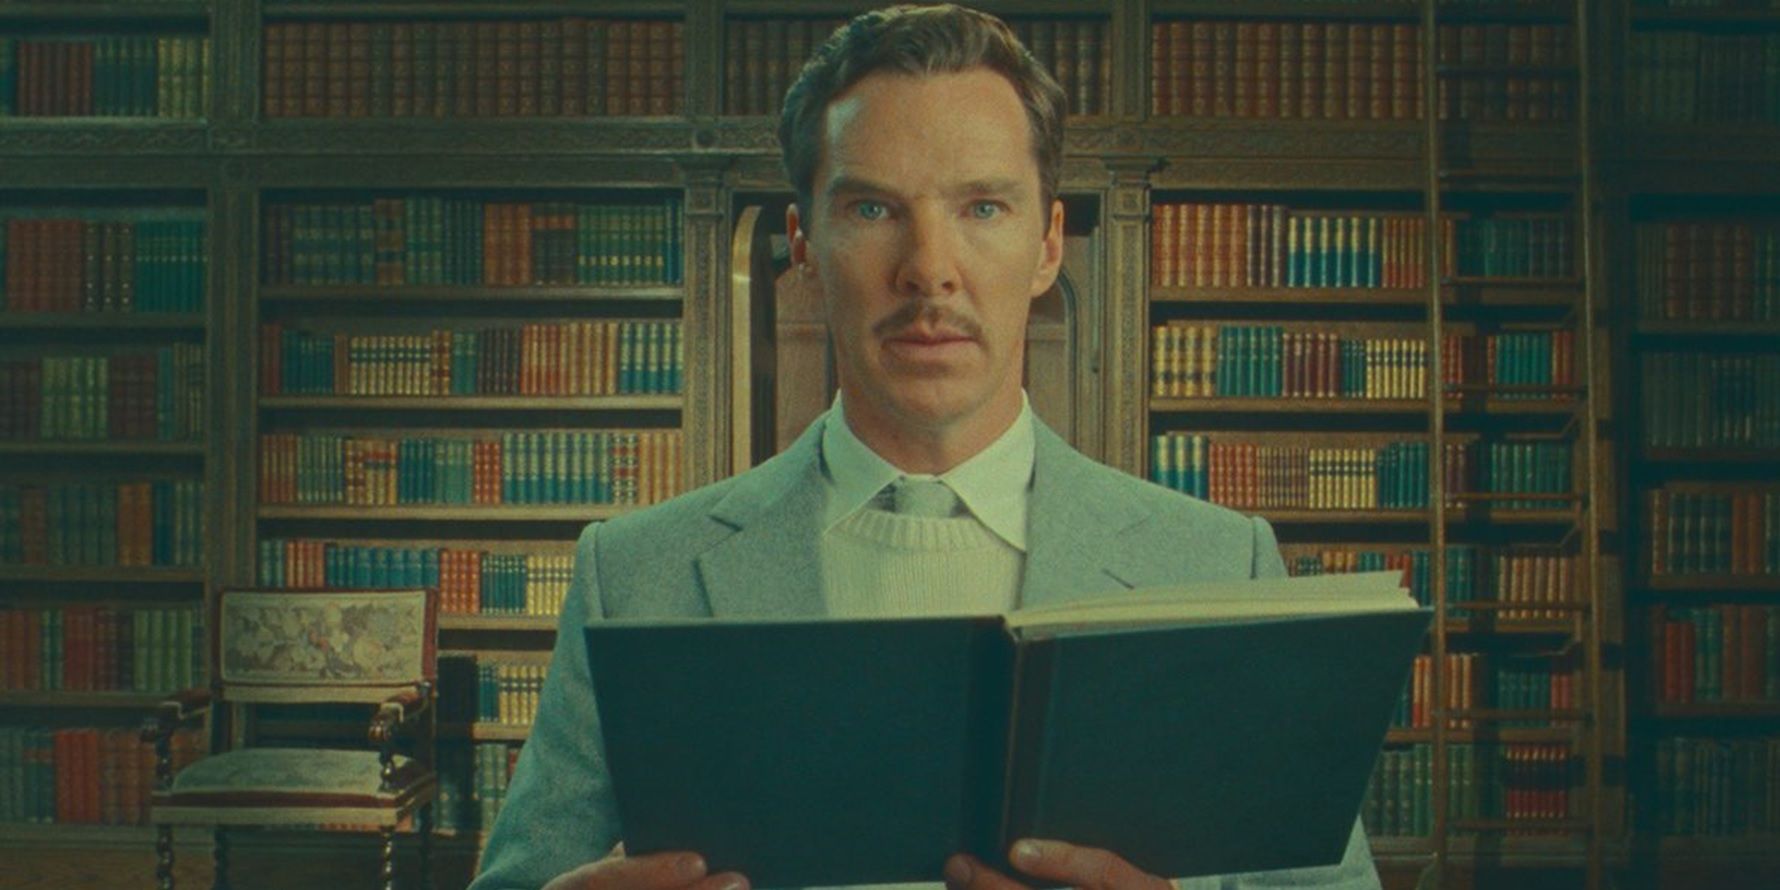 Benedict Cumberbatch as Henry reading a book in The Wonderful Story of Henry Sugar